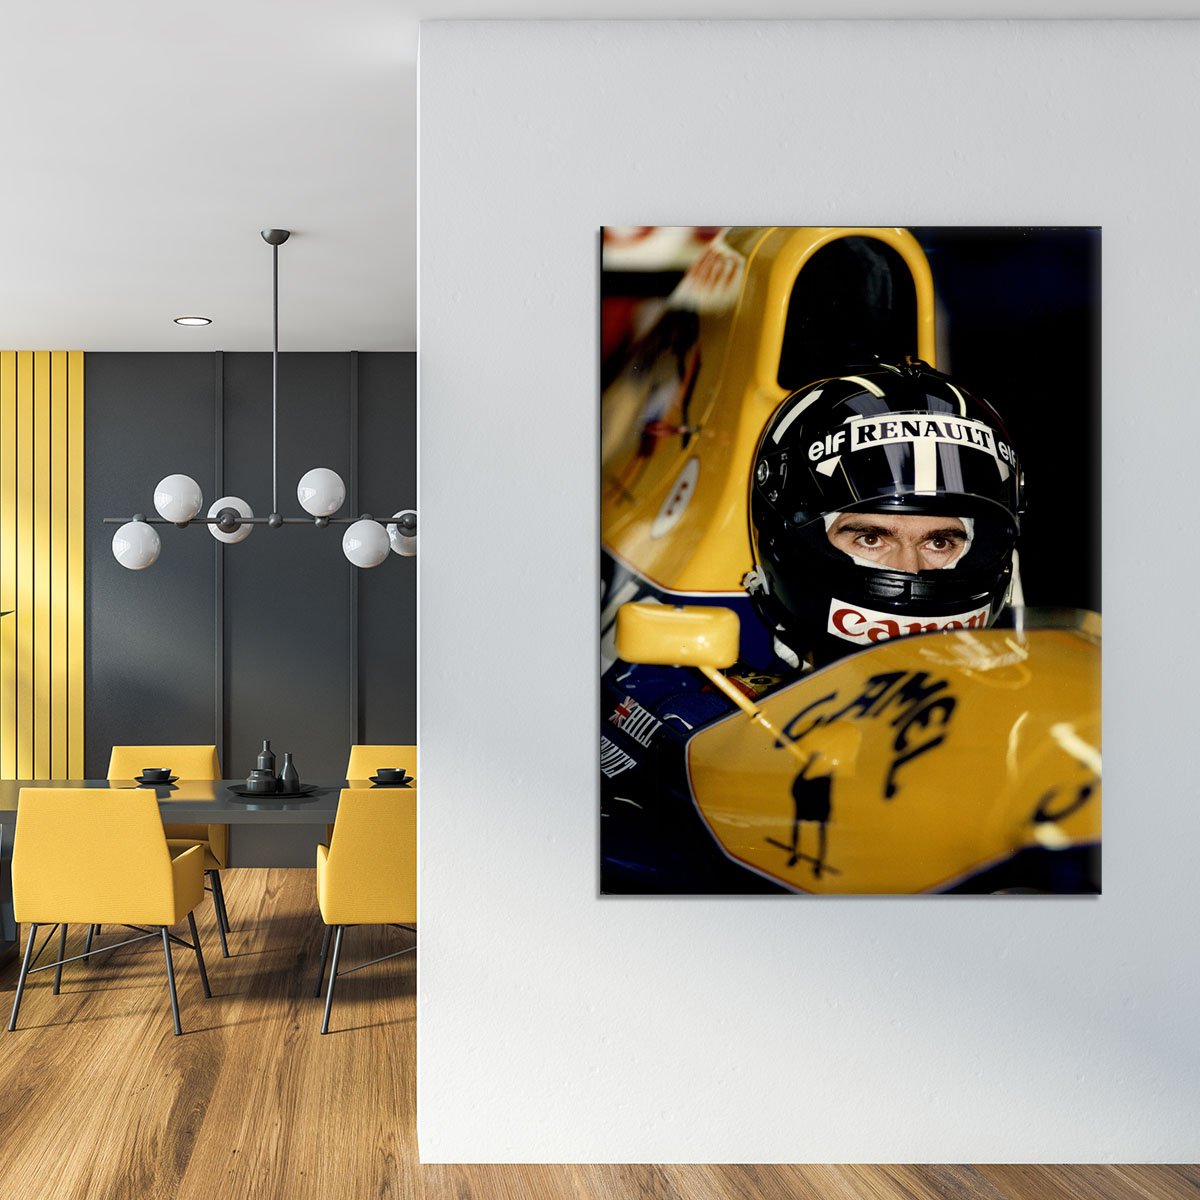 Damon Hill at Silverstone Canvas Print or Poster